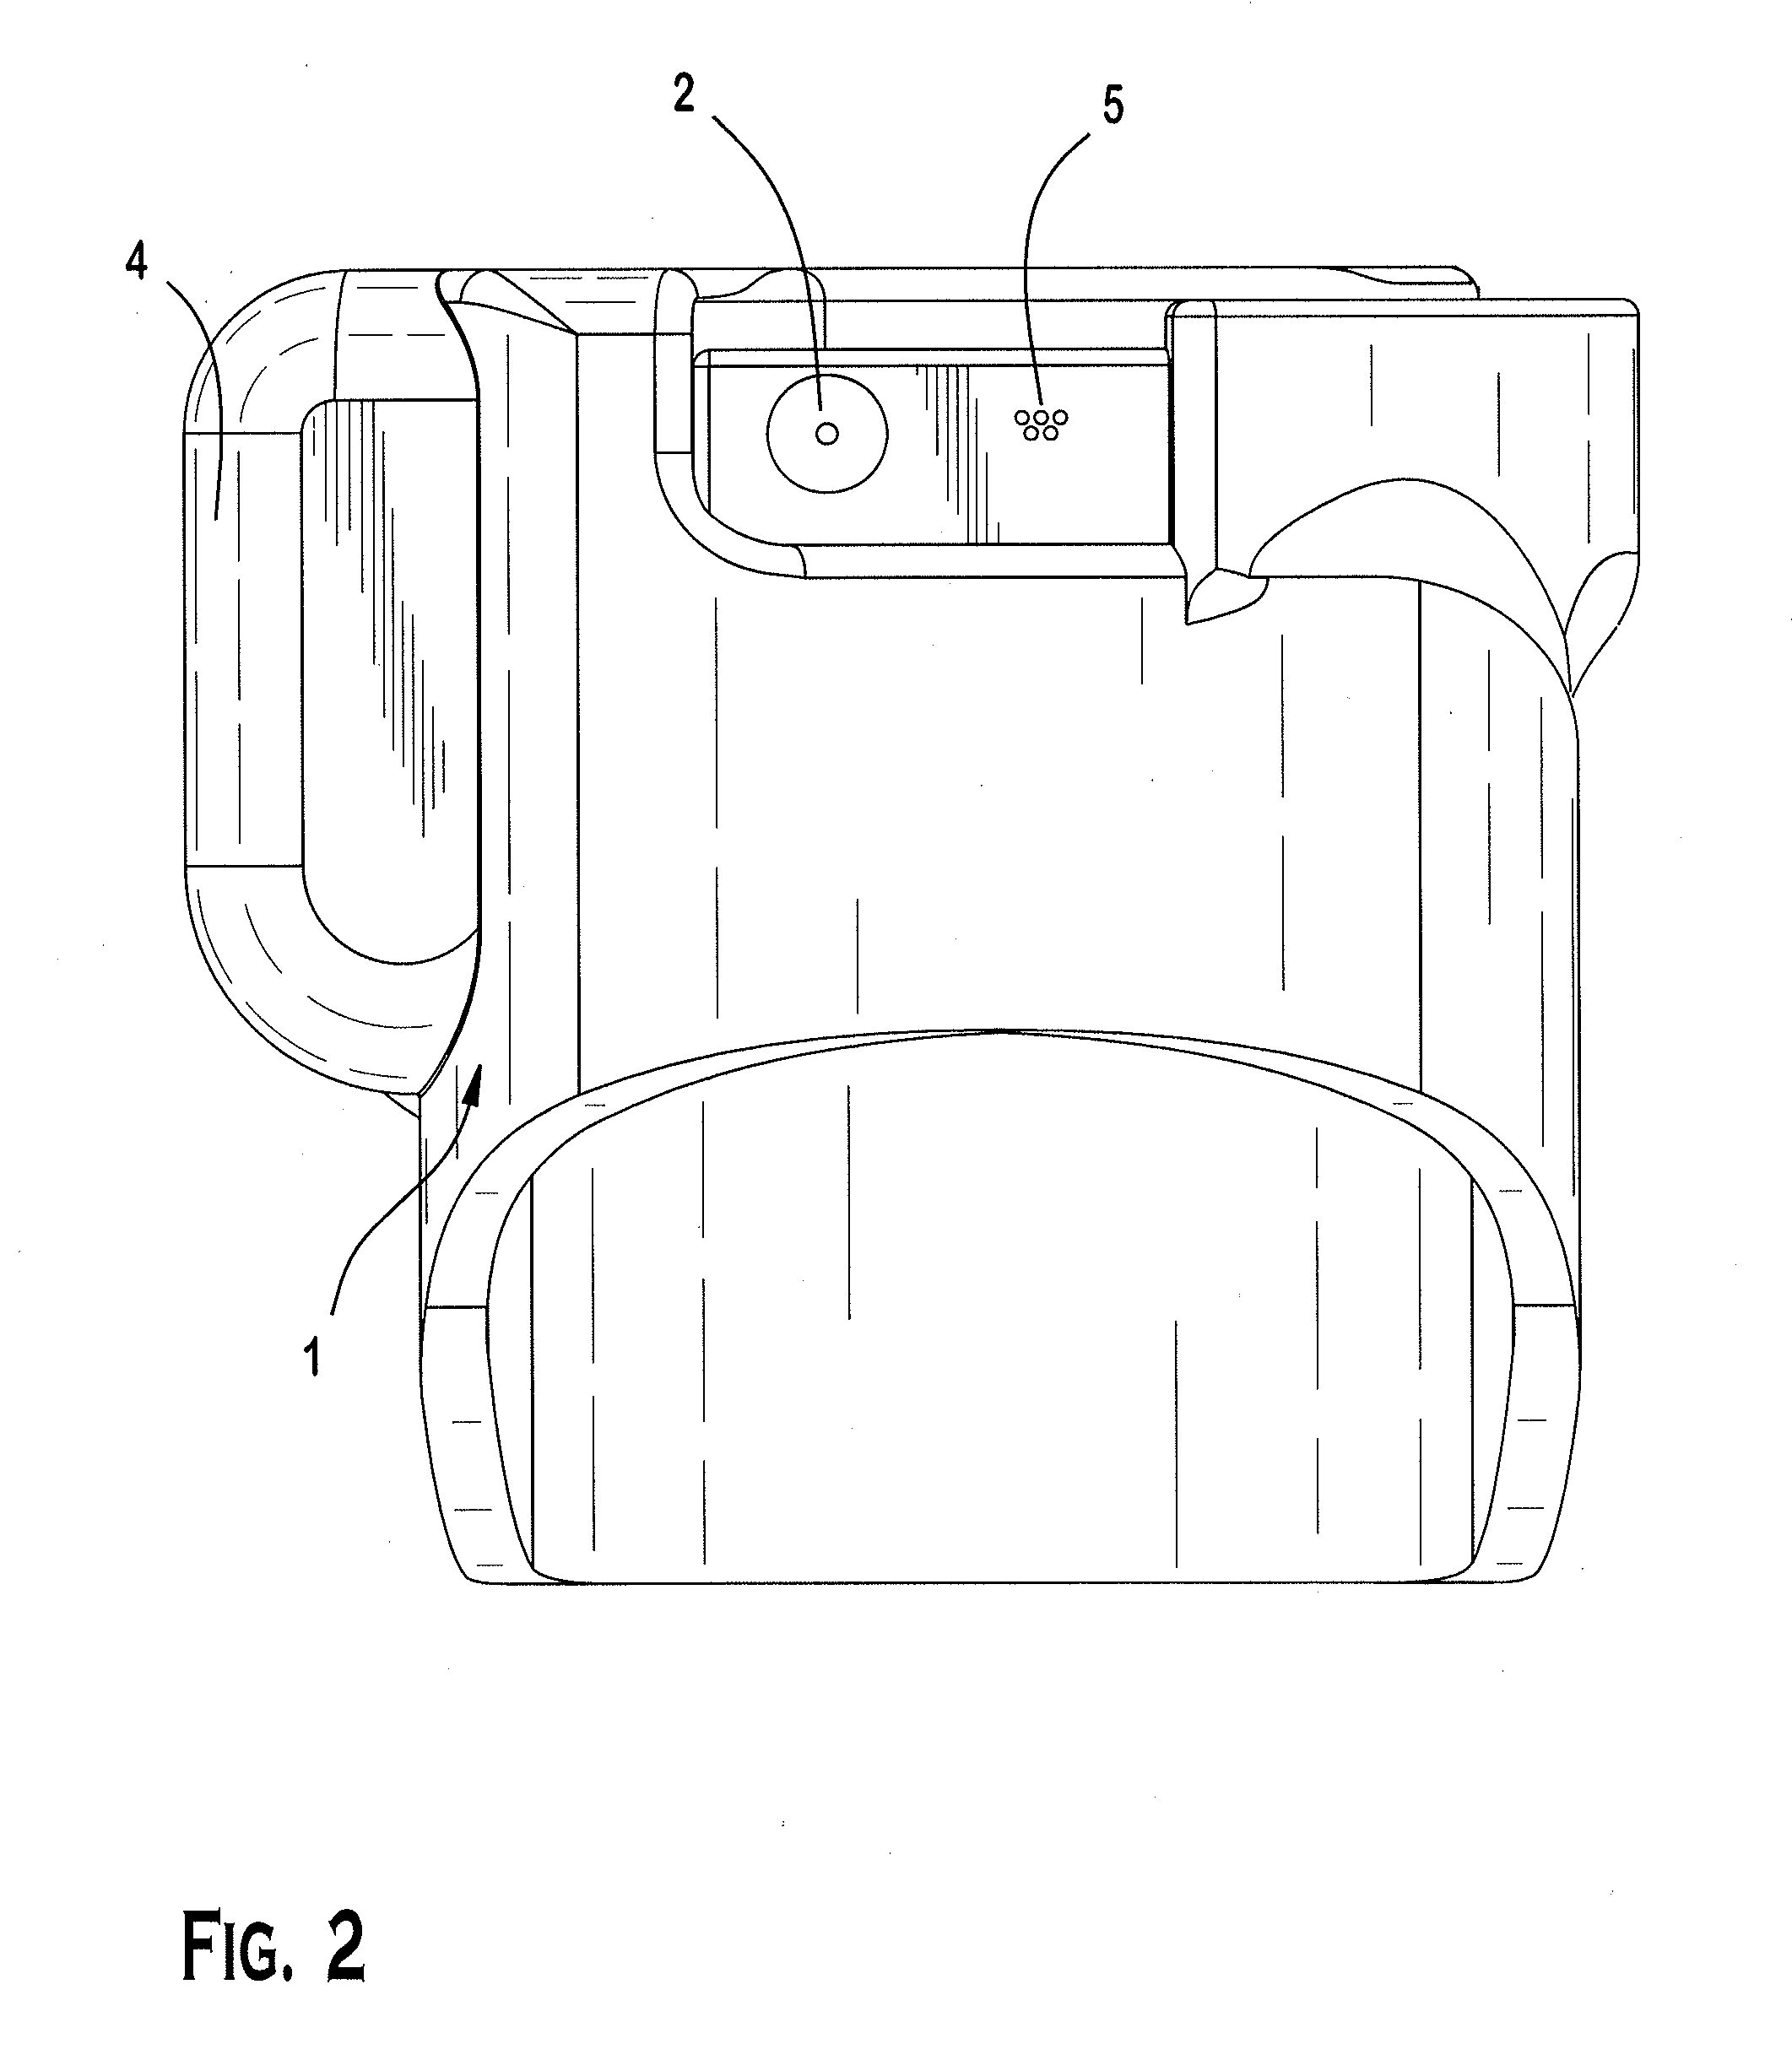 Method and apparatus to measure, aid and correct the use of inhalers